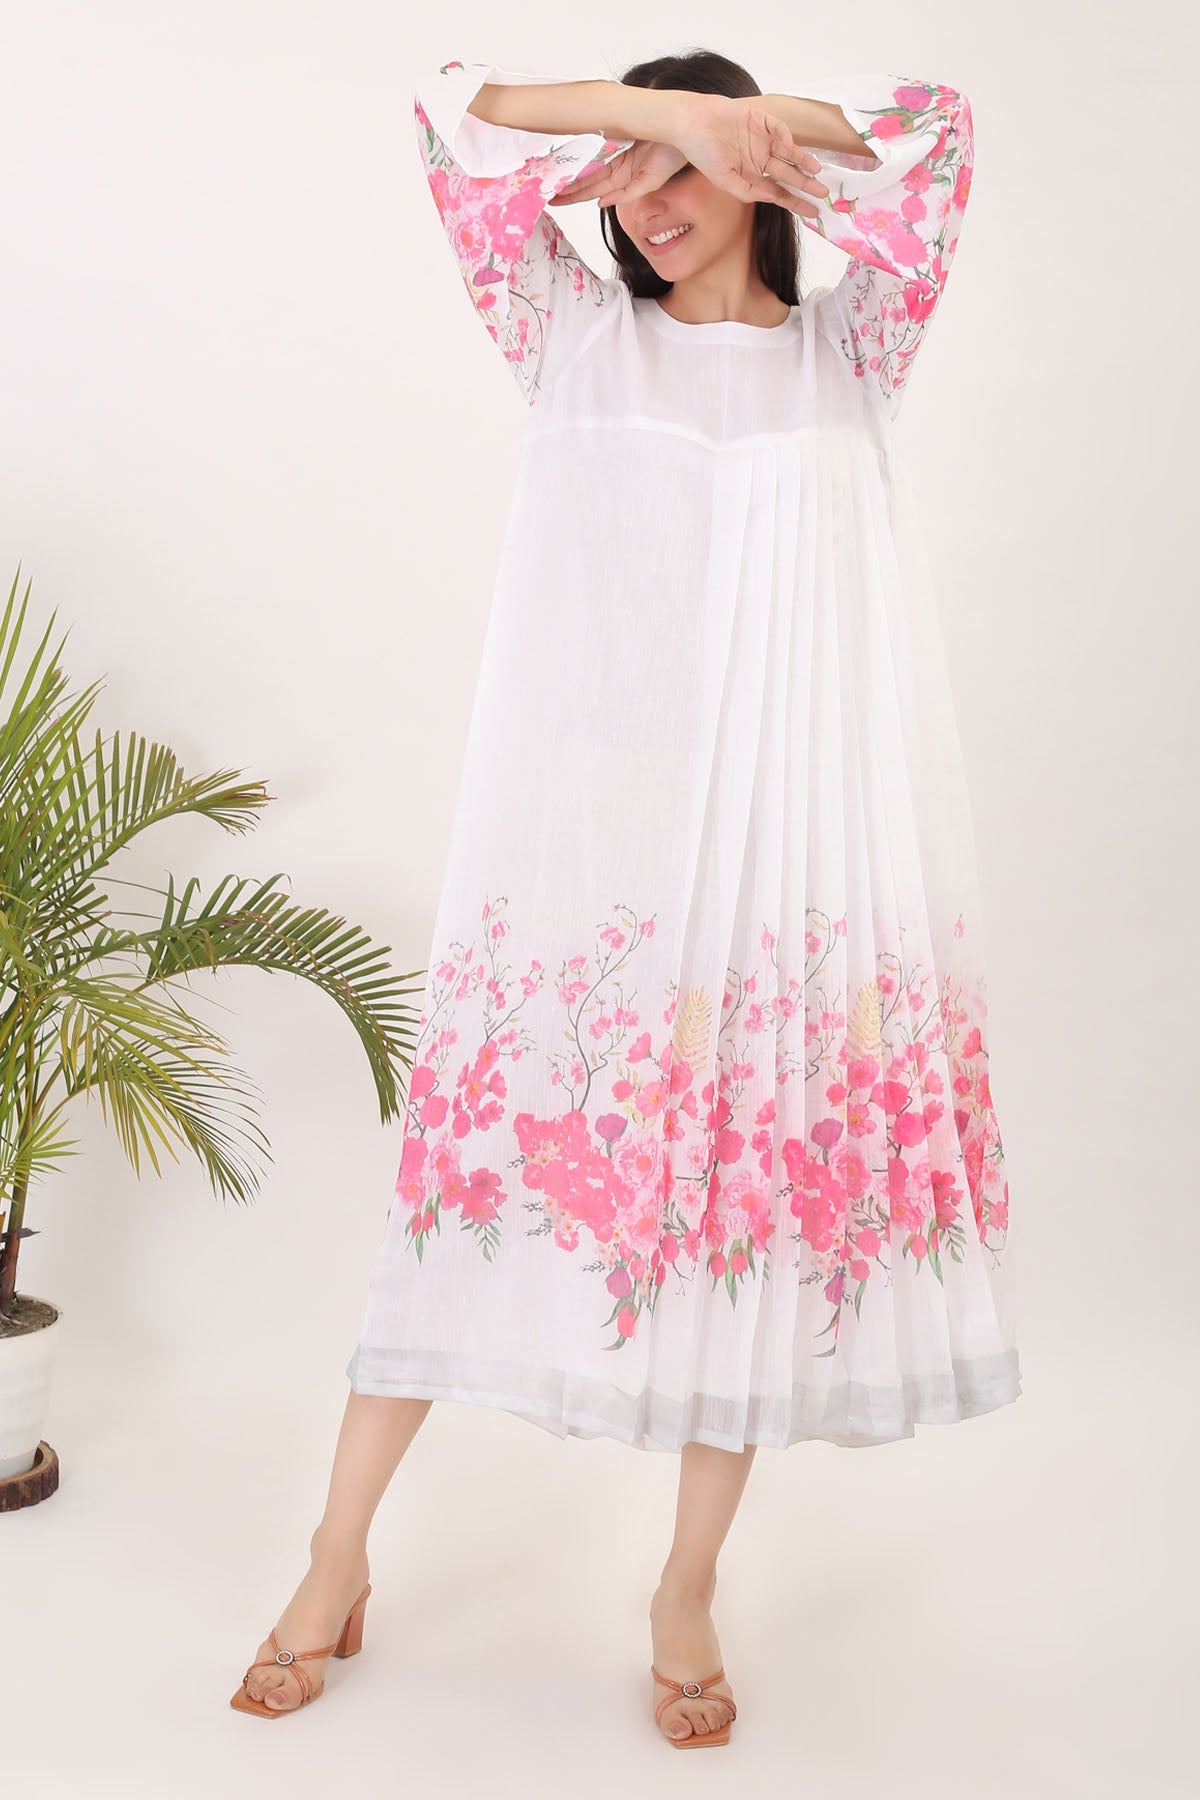 Buy Simply Kitsch Pink, White Dress for Women online available at ScrollnShops